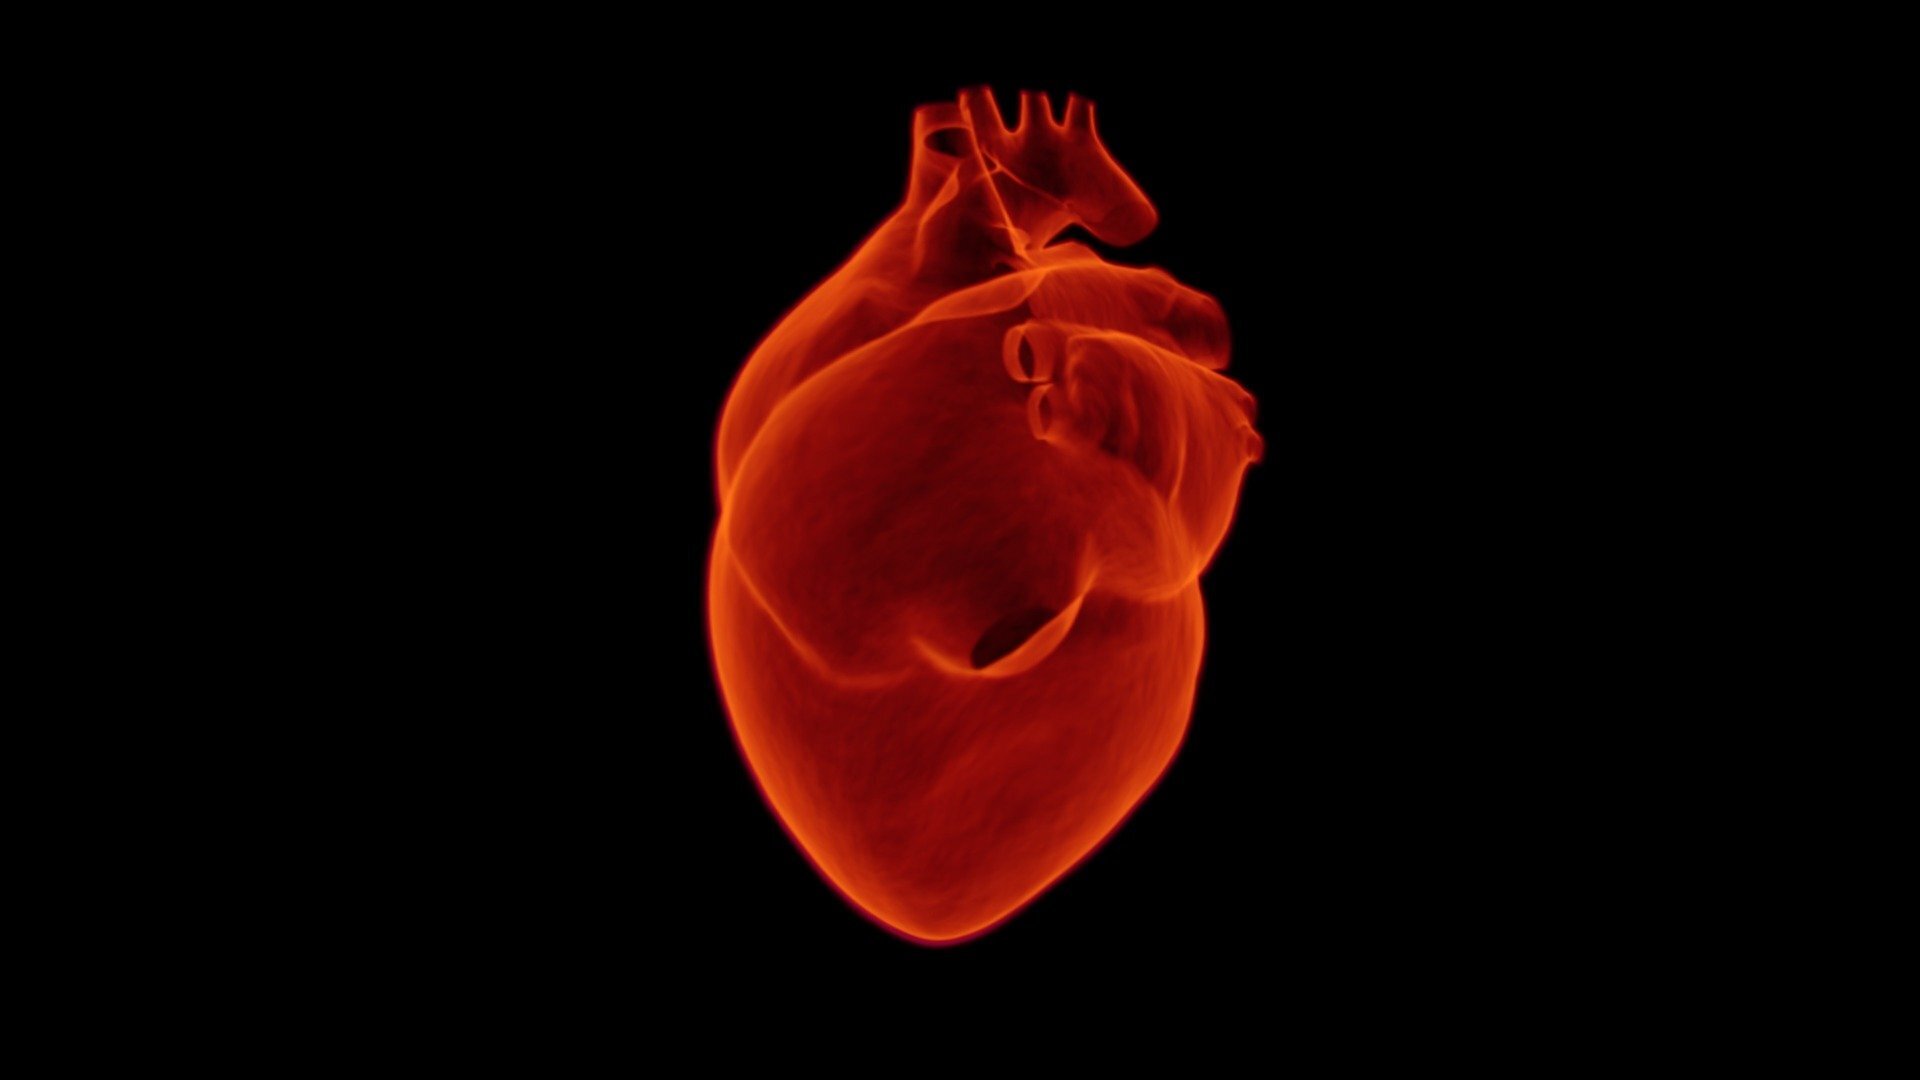 Women with hardened arteries may need stronger treatment to prevent heart attacks than men